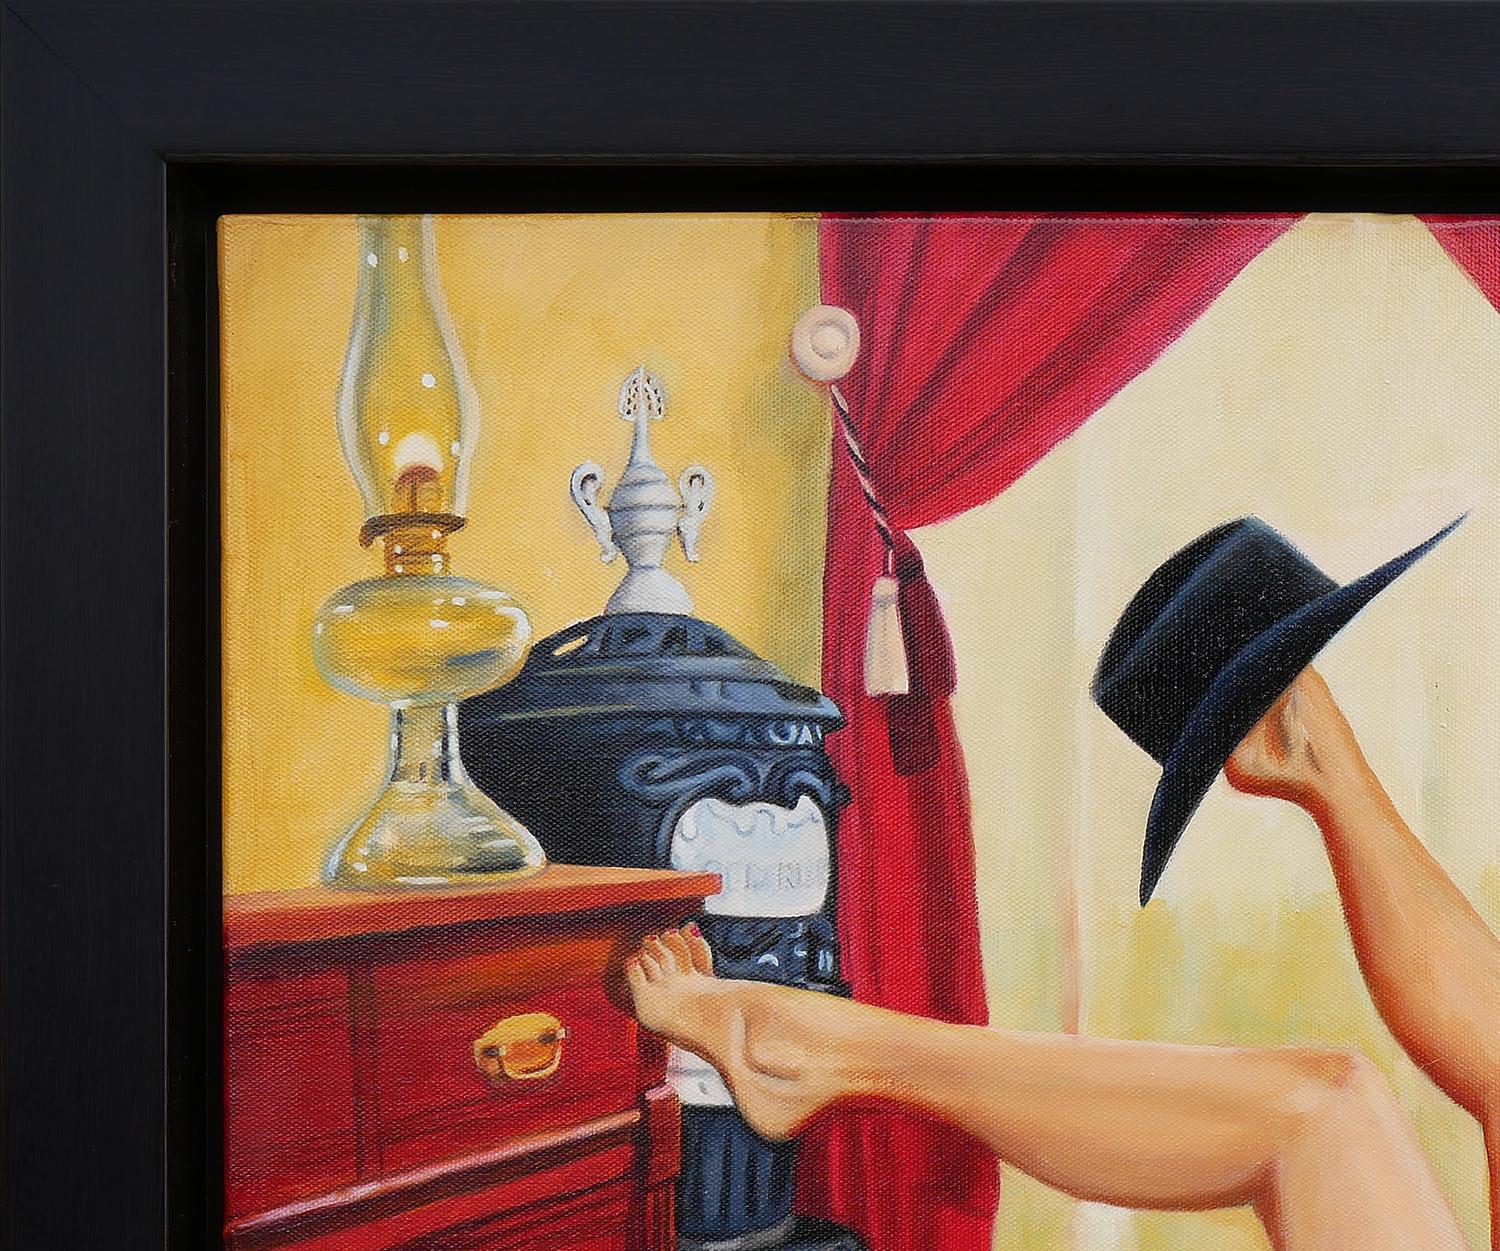 Warm-toned abstract contemporary figurative painting by Texas artist Bob Shepherd. The painting depicts a woman with a black cowboy hat balanced on her foot. The woman is in a small tin tub situated inside a bedroom. Signed by the artist at the